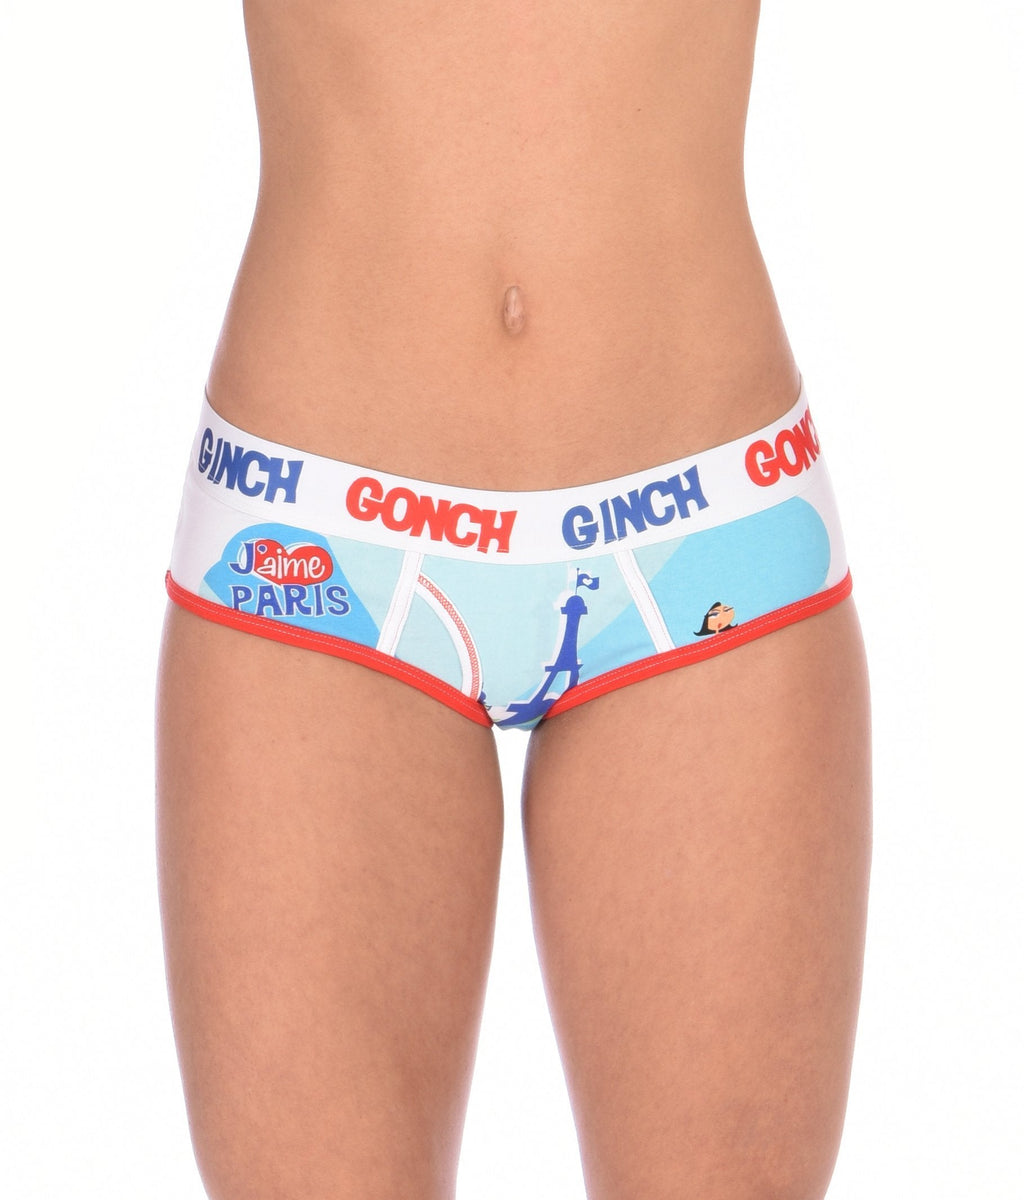 GG Ginch Gonch I Love Paris boy cut Brief - y front women's Underwear white fabric with scene of eiffel tower and french person red and white trim and white printed waistband front